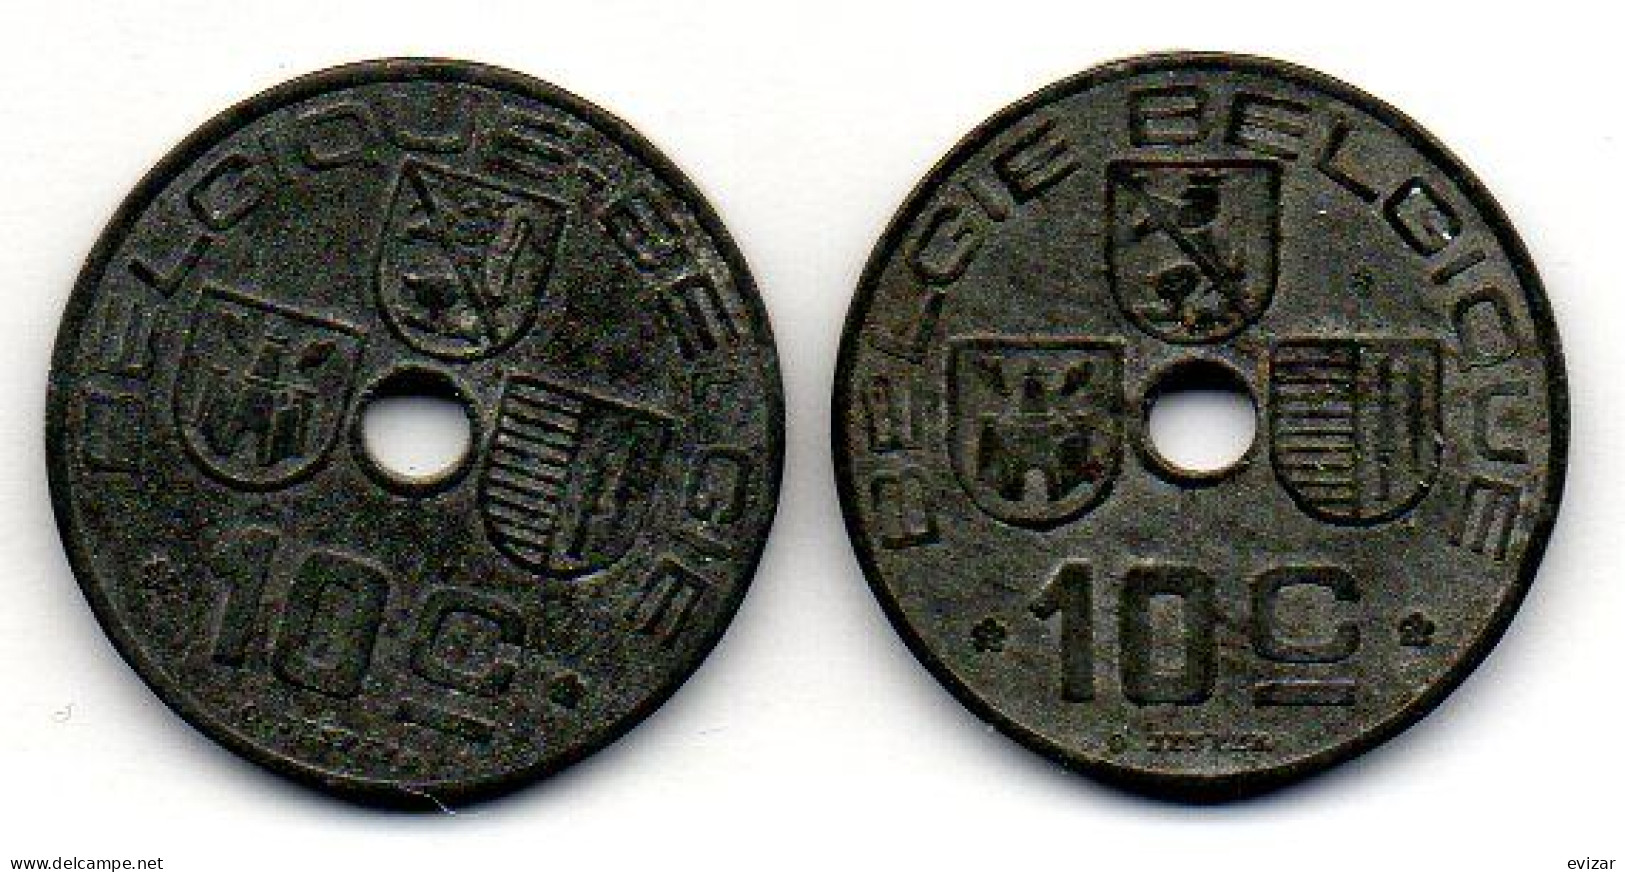 BELGIUM - GERMAN OCCUPATION WWII - Set Of Two Coins 10 Centimes, Zinc, Year 1942-44, KM #125, 126, French & Dutch Legend - 10 Centimos